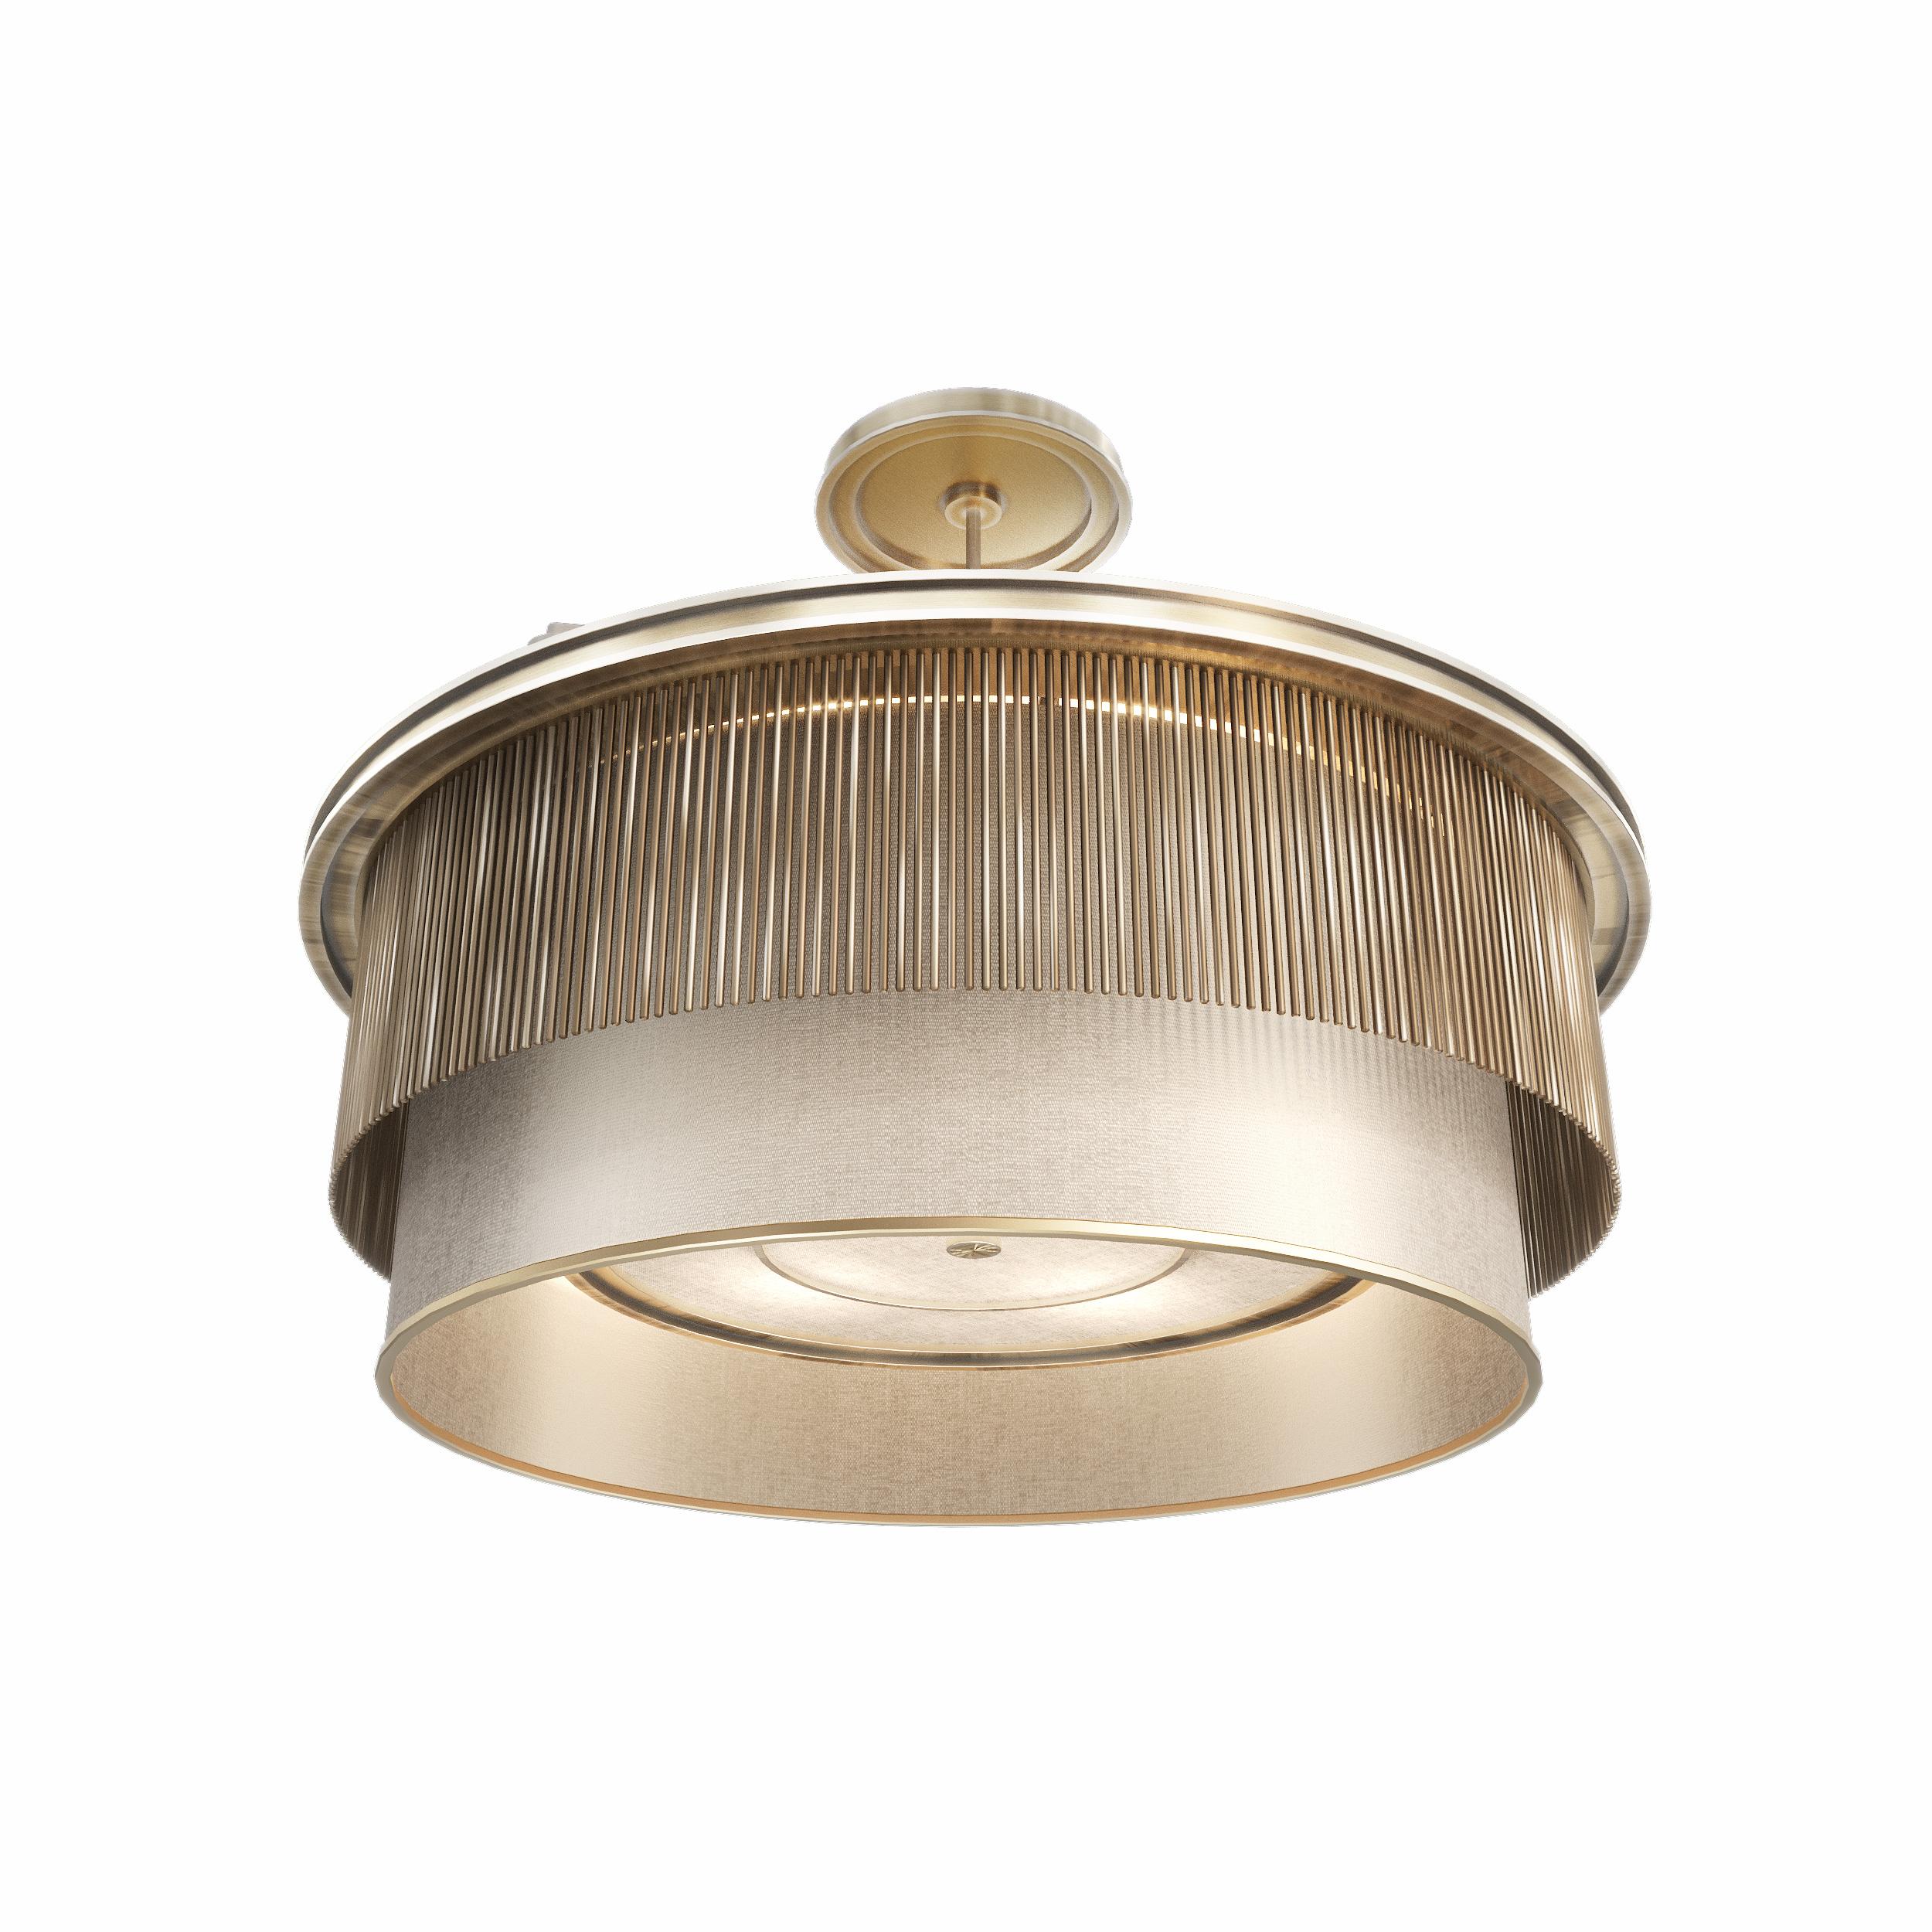 The Meridian contemporary chandelier features an acrylic lampshade covered in sophisticated thin metal elements. All the functional elements are not visible. This lighting fixture is a genuine piece of jewellery for the interior. The design is